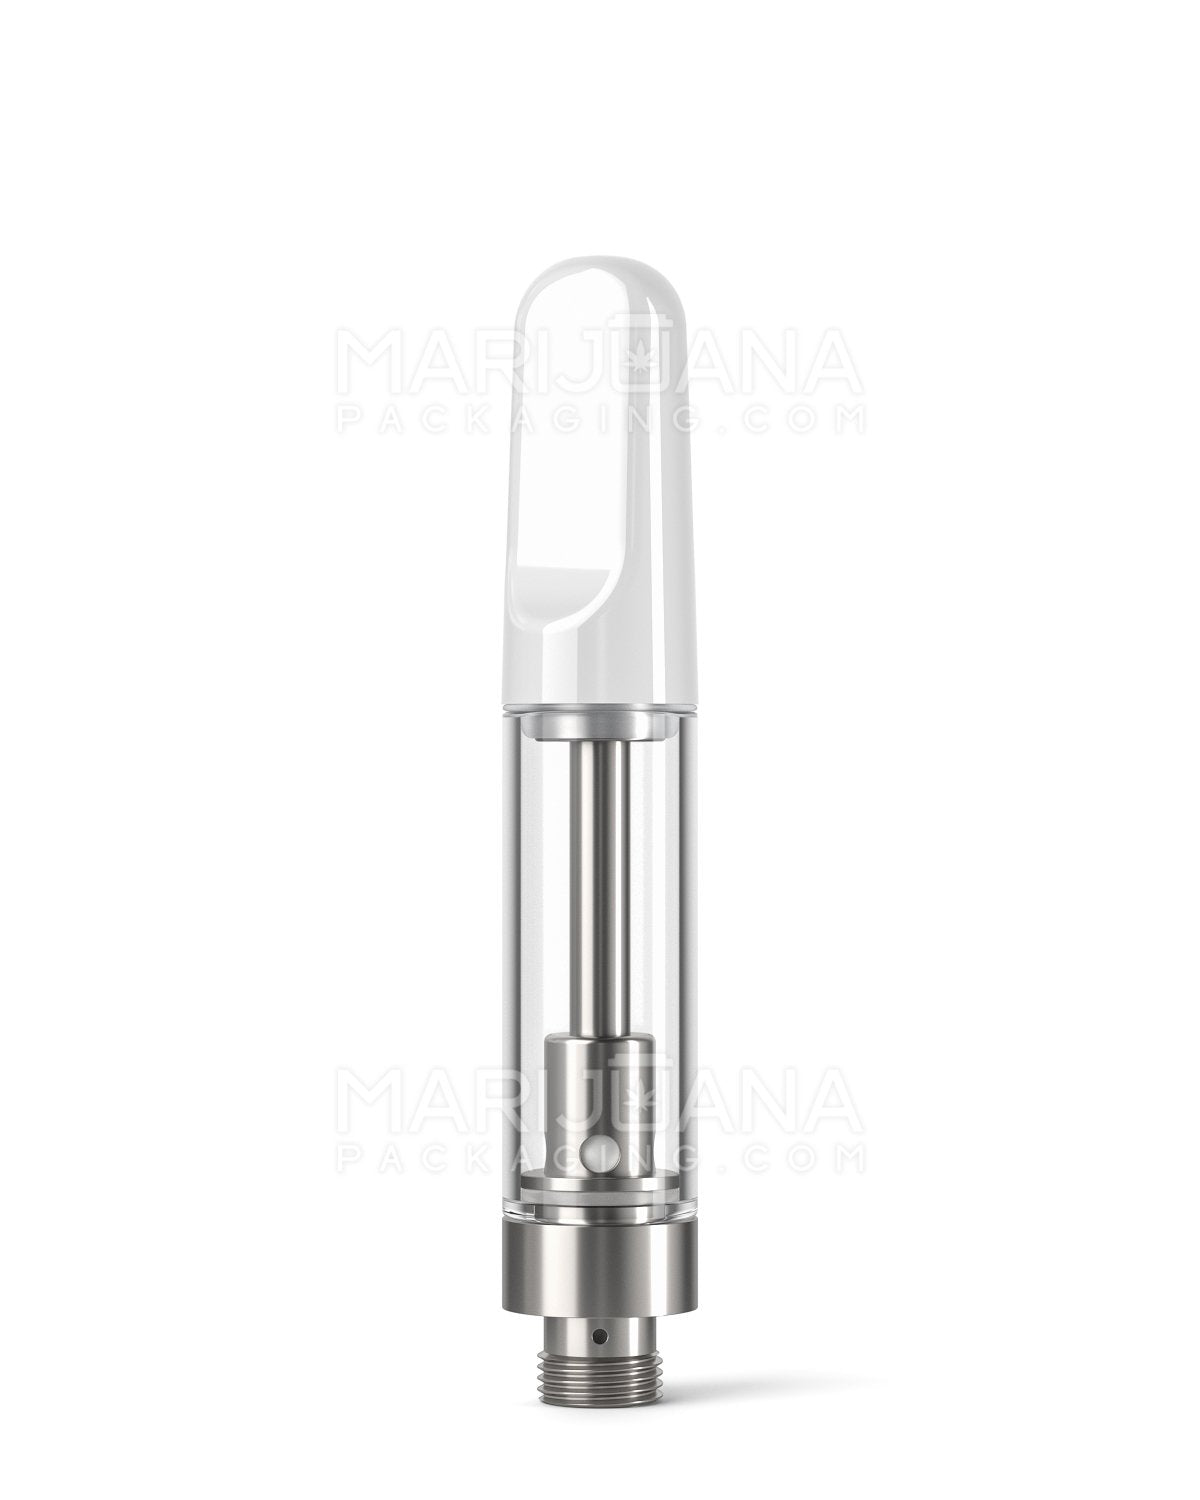 CCELL | Liquid6 Reactor Glass Cartridge with White Ceramic Mouthpiece | 1mL - Screw On | Sample - 1